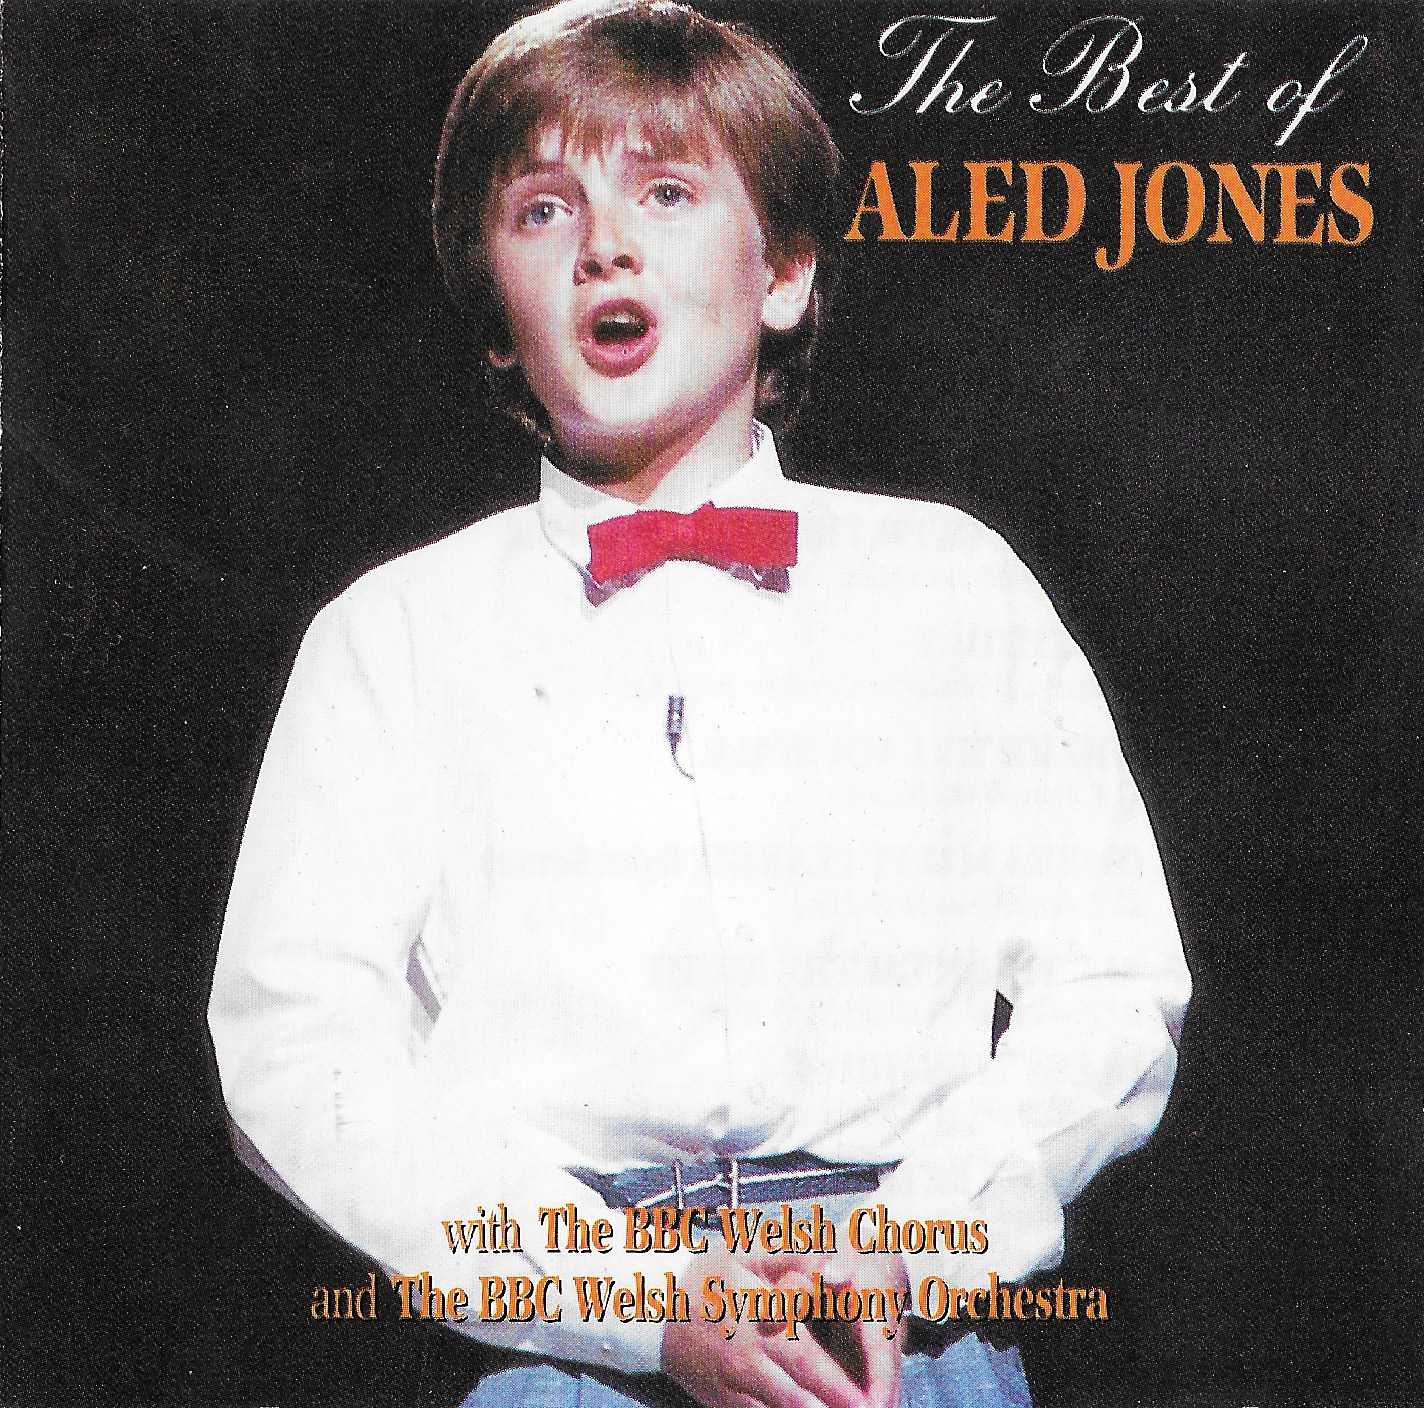 Picture of PWKM 662 Aled Jones by artist Aled Jones from the BBC cds - Records and Tapes library